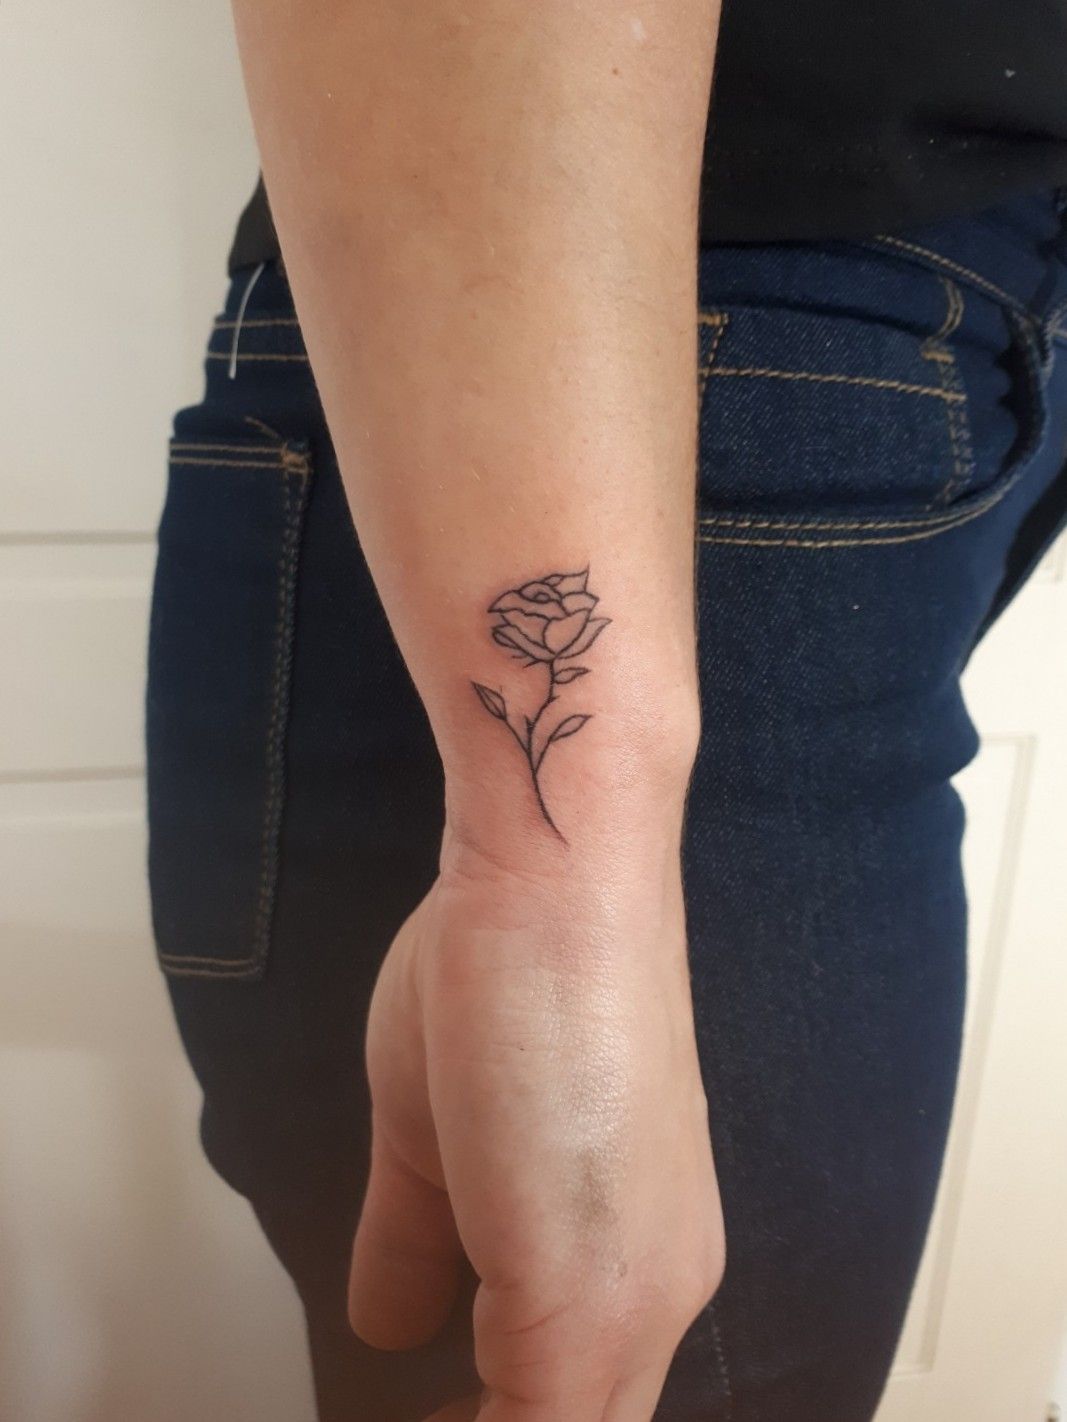 Tiny sprout tattoo on the back of the left arm